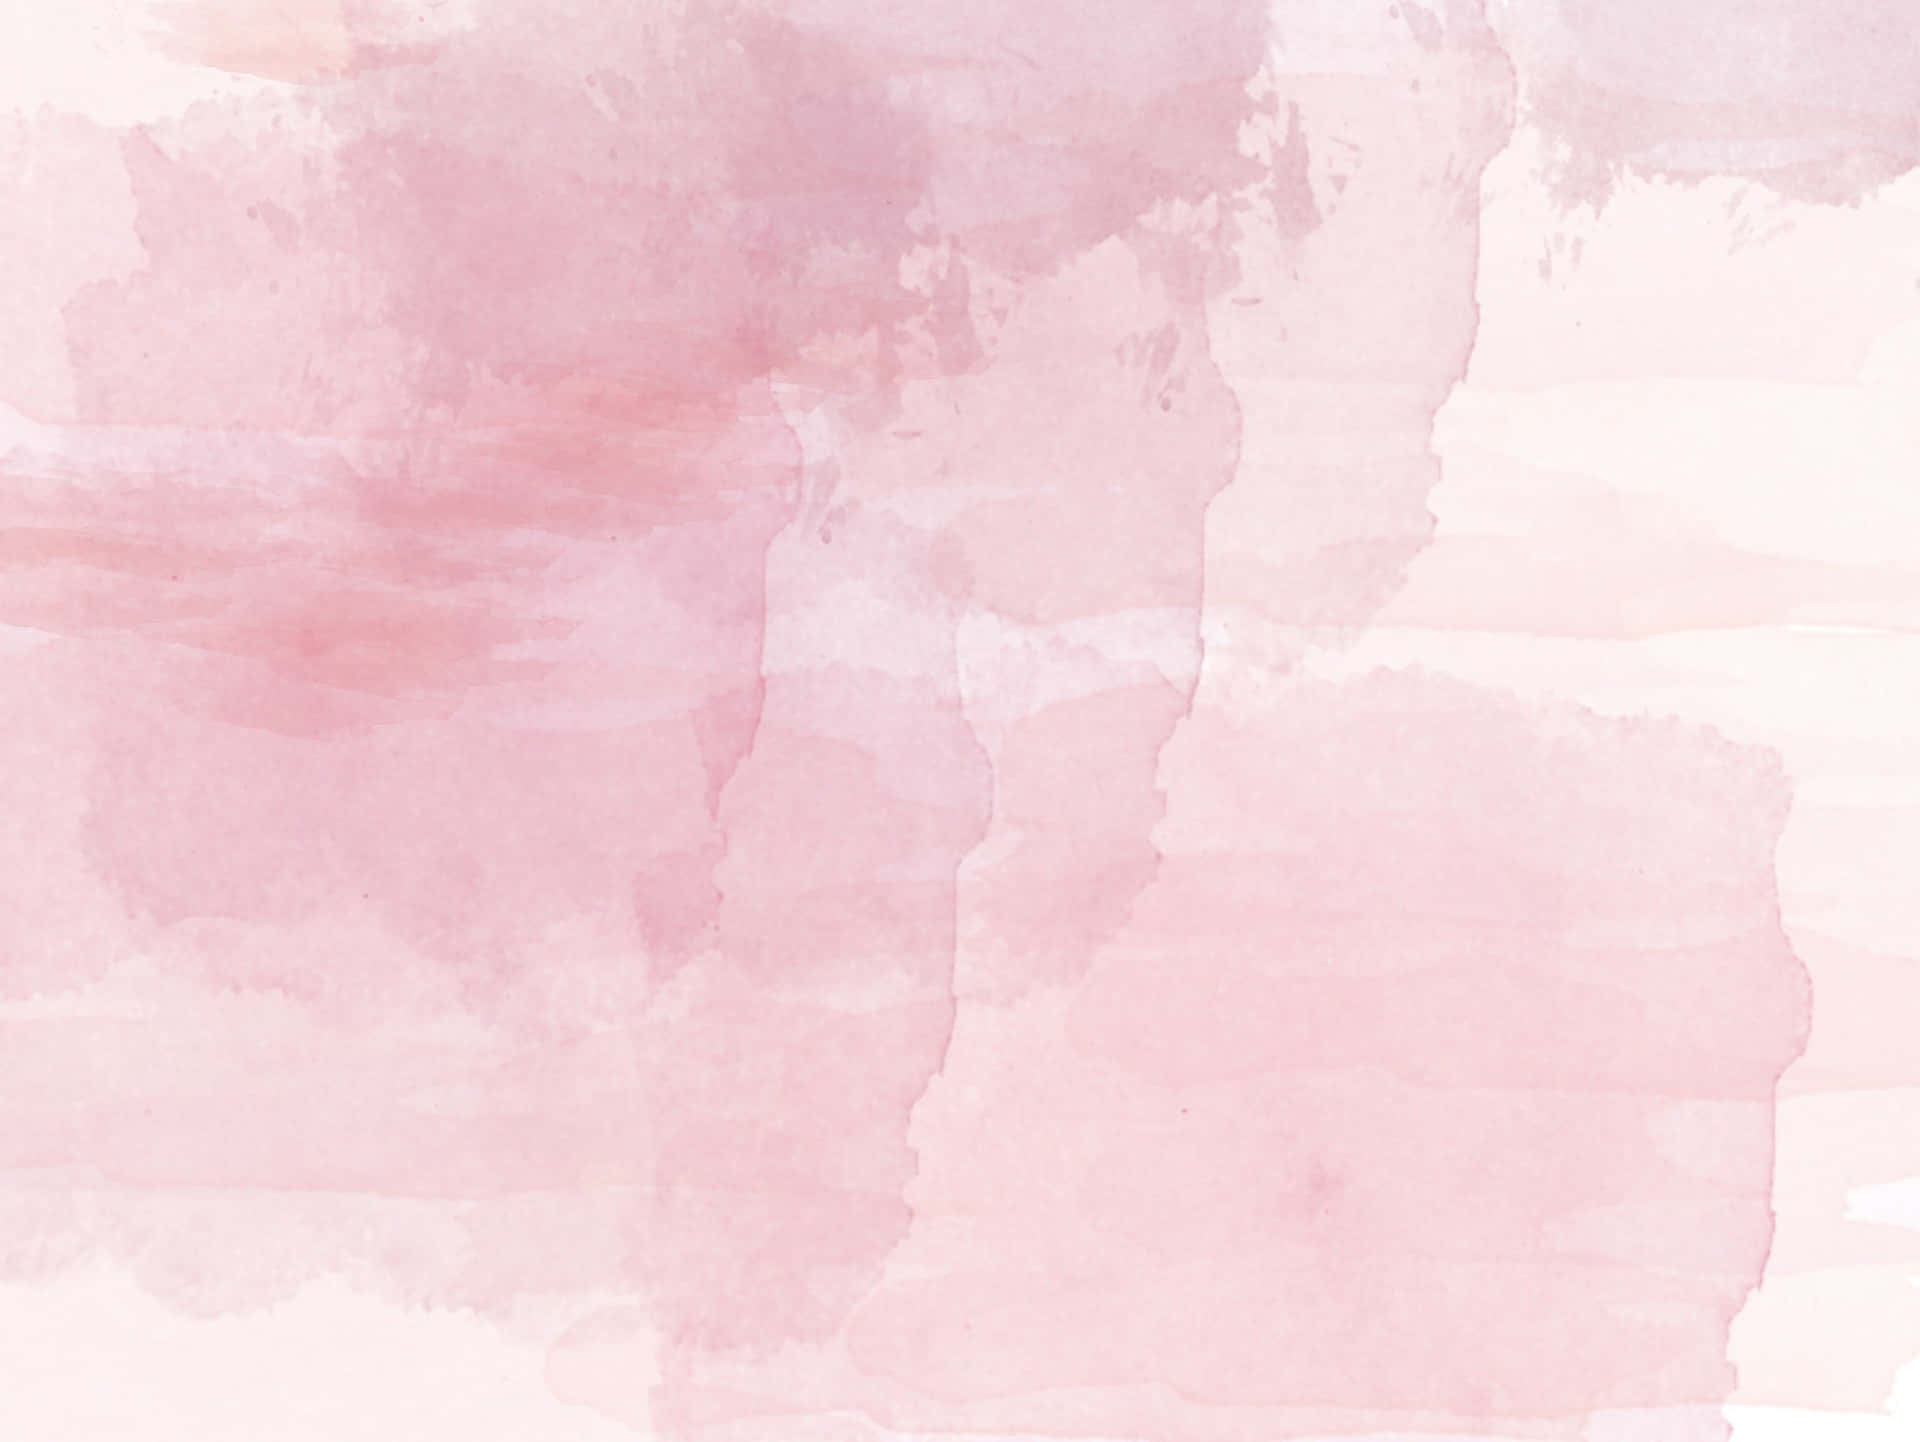 Bright pink watercolor background texture. Gradient pink aquarelle